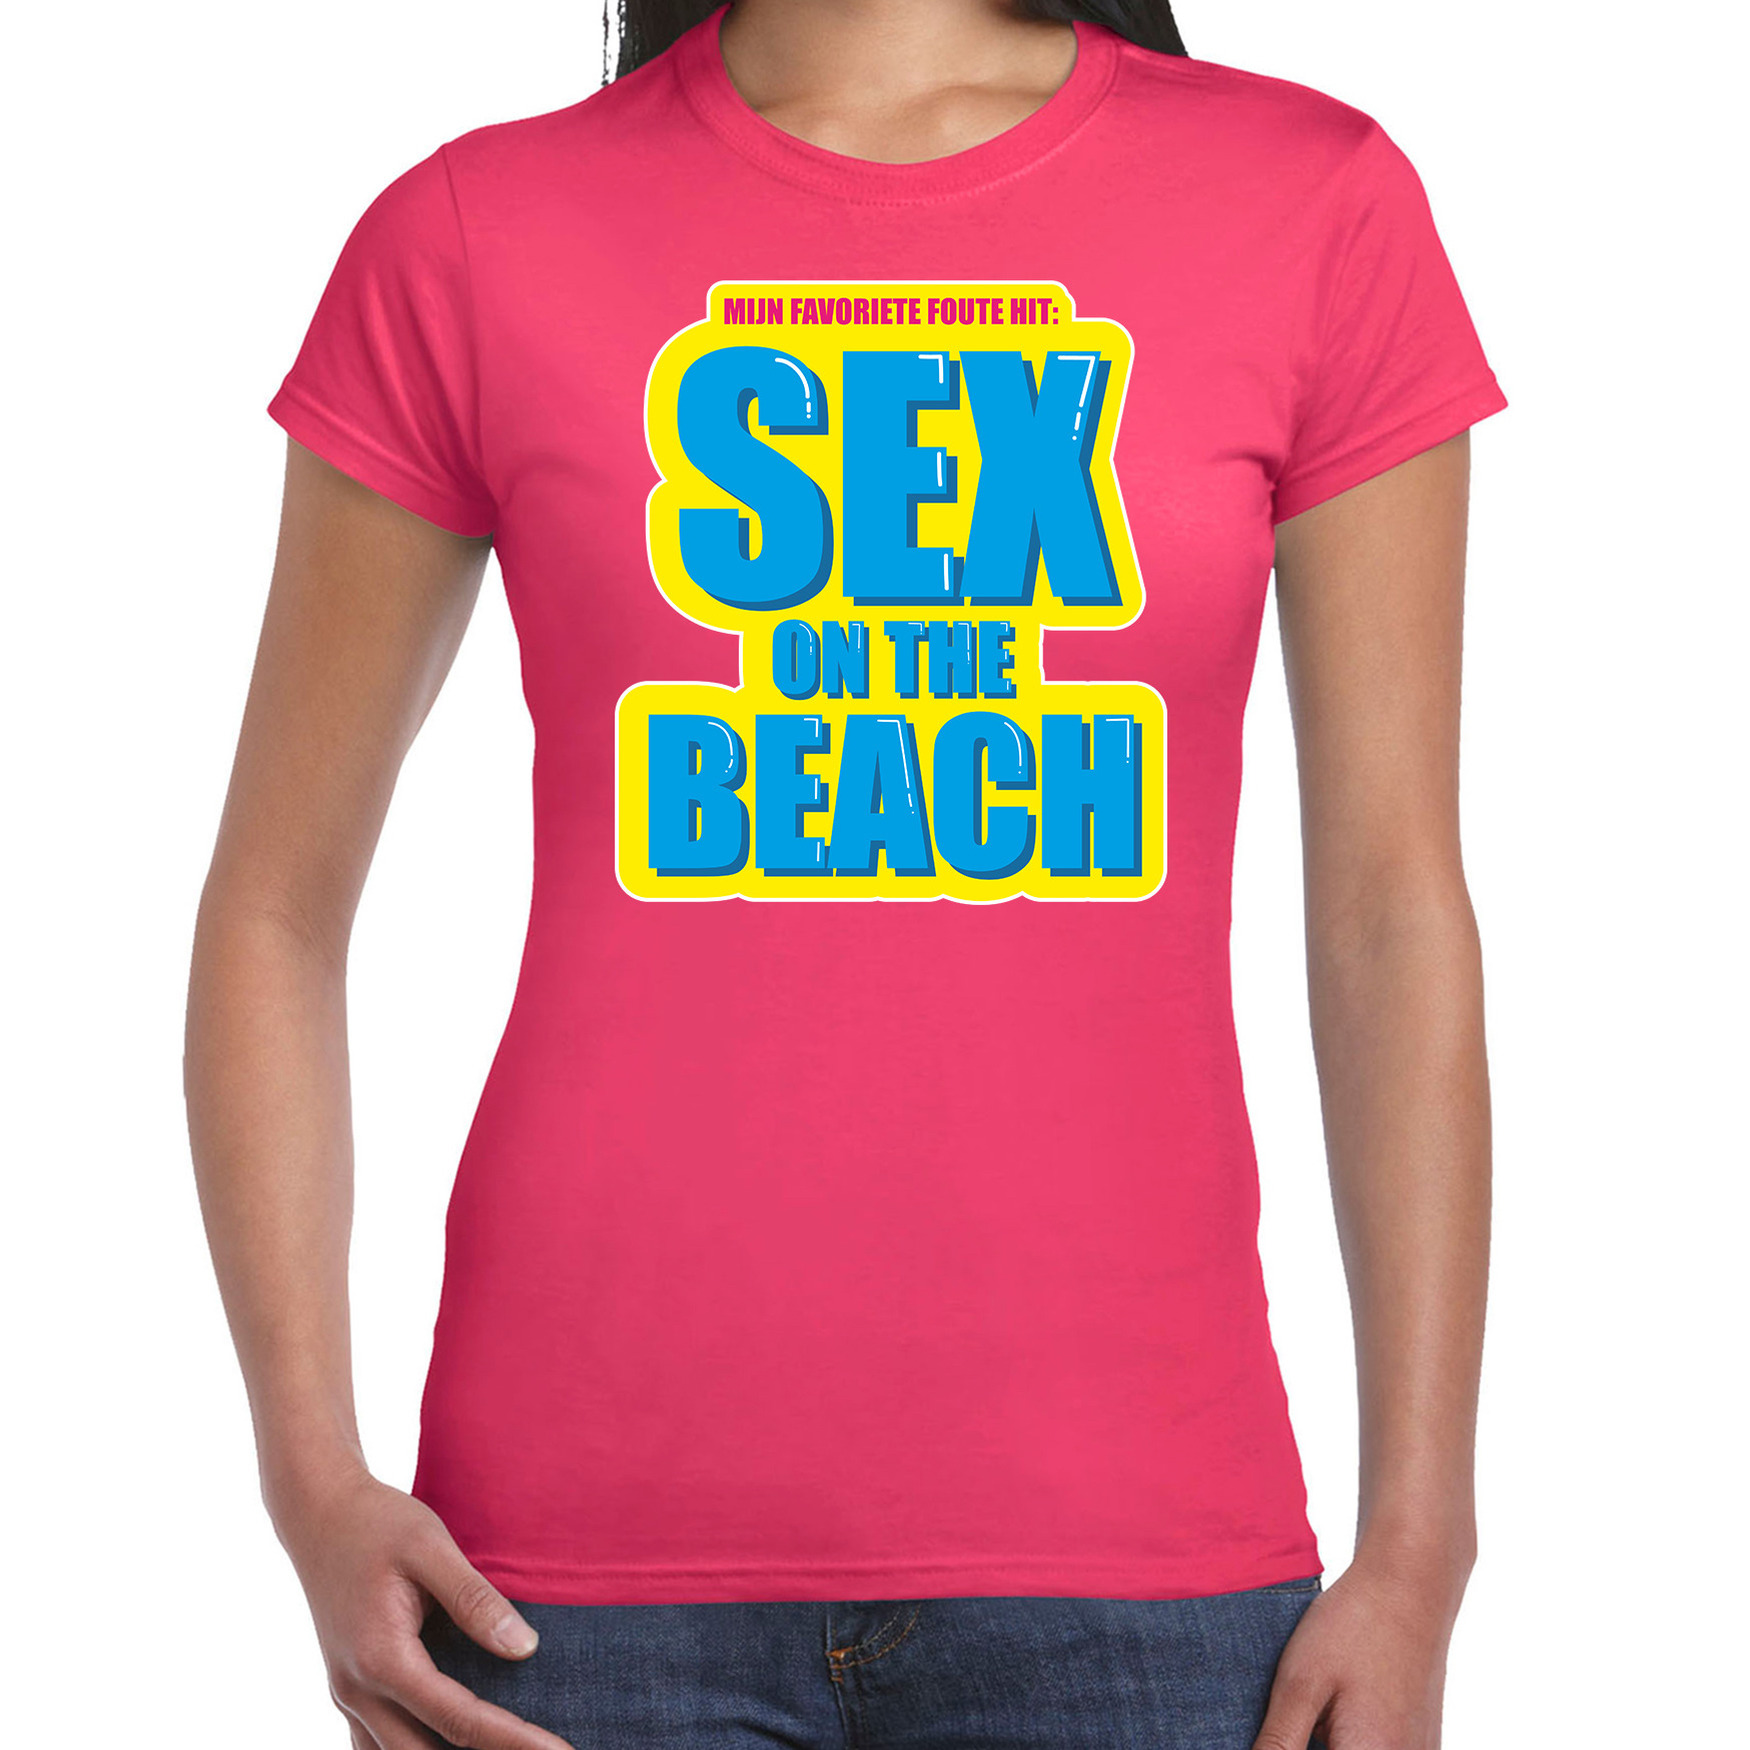 Foute party Sex on the beach verkleed t-shirt roze dames Foute party hits outfit- kleding